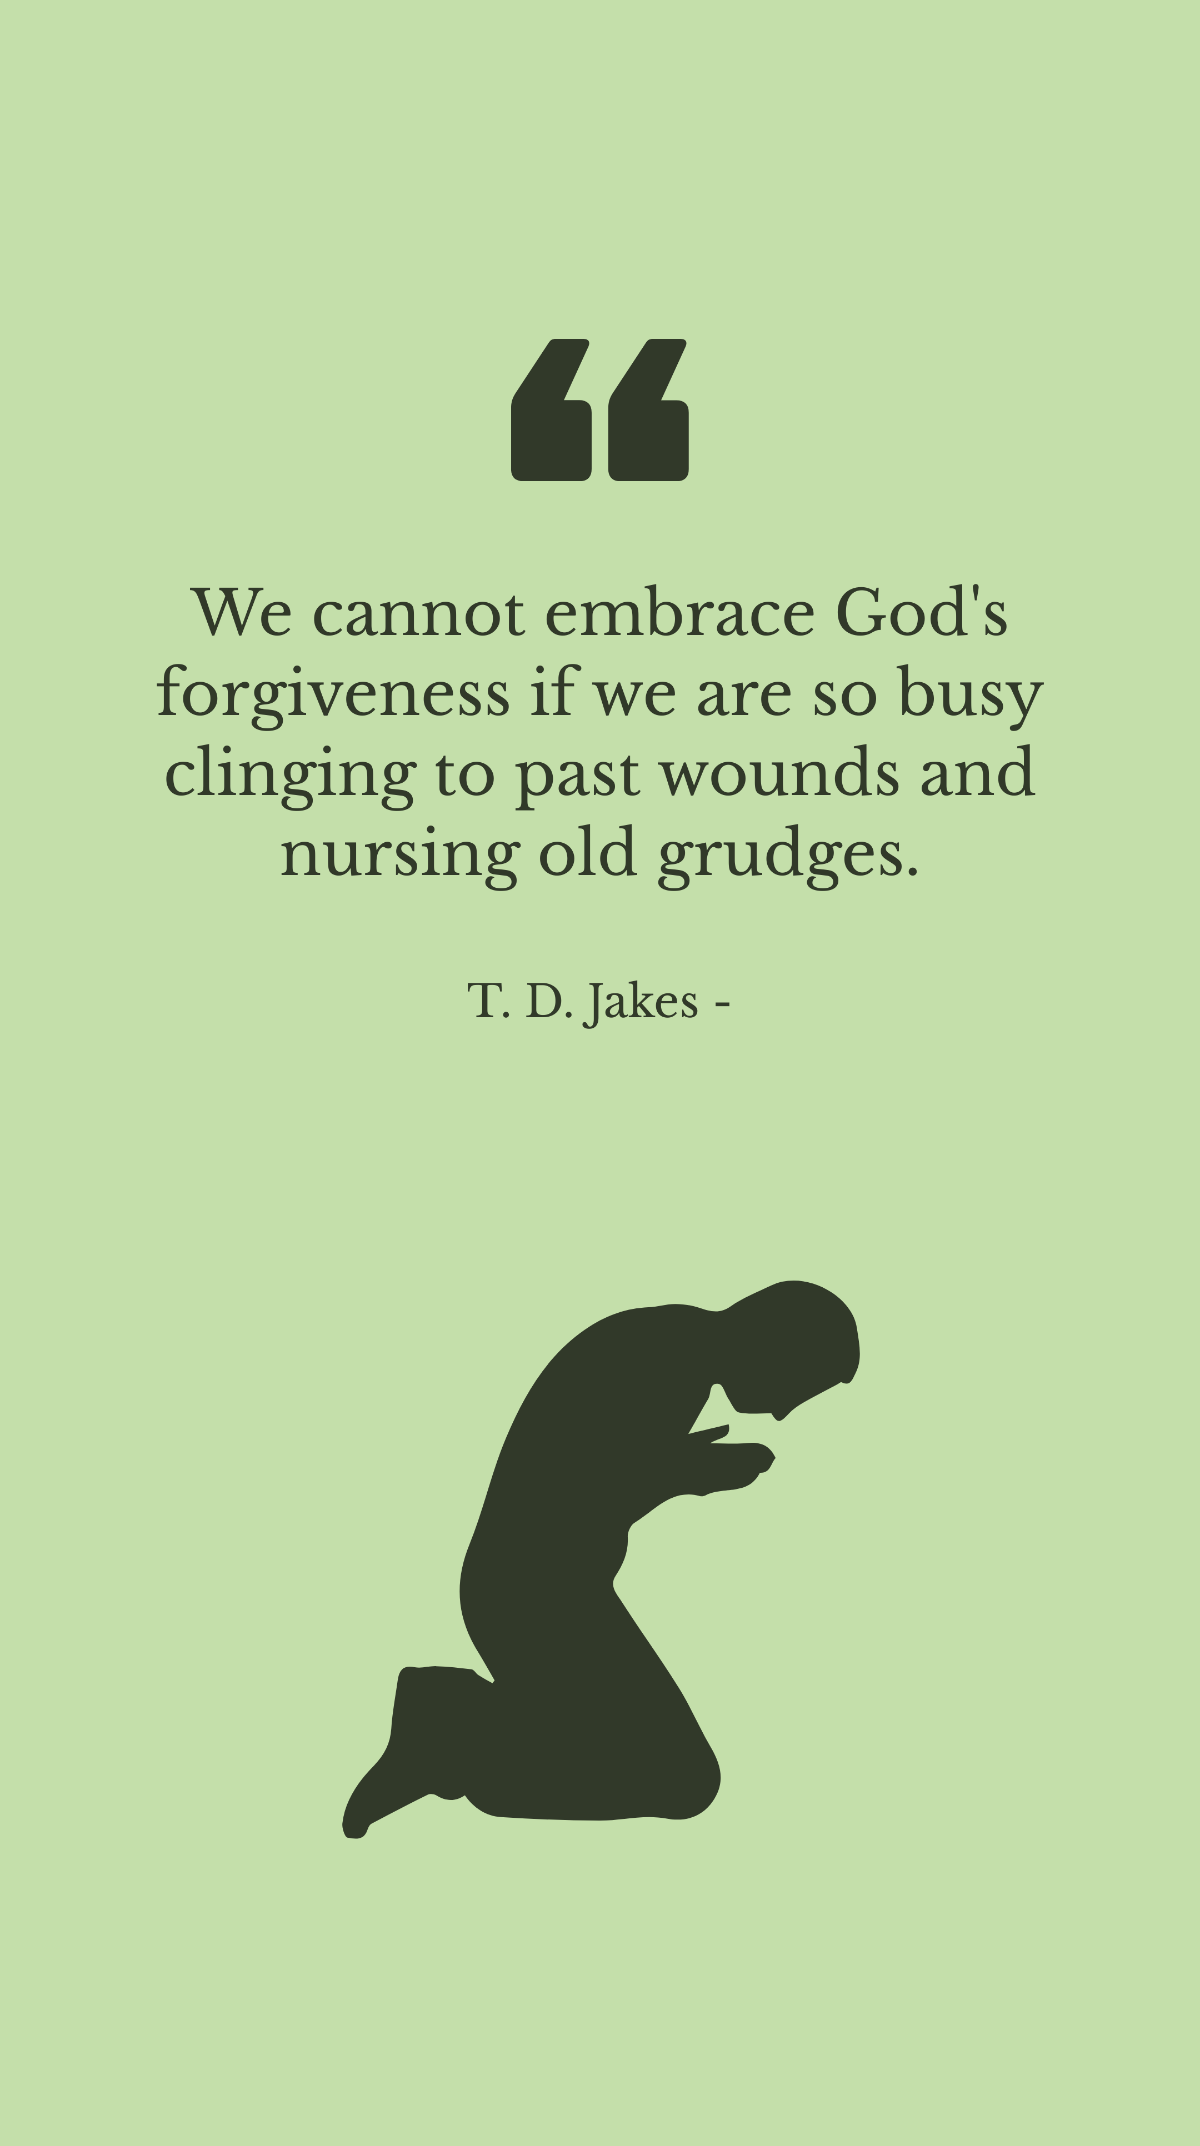 Free T. D. Jakes - We cannot embrace God's forgiveness if we are so busy clinging to past wounds and nursing old grudges. Template